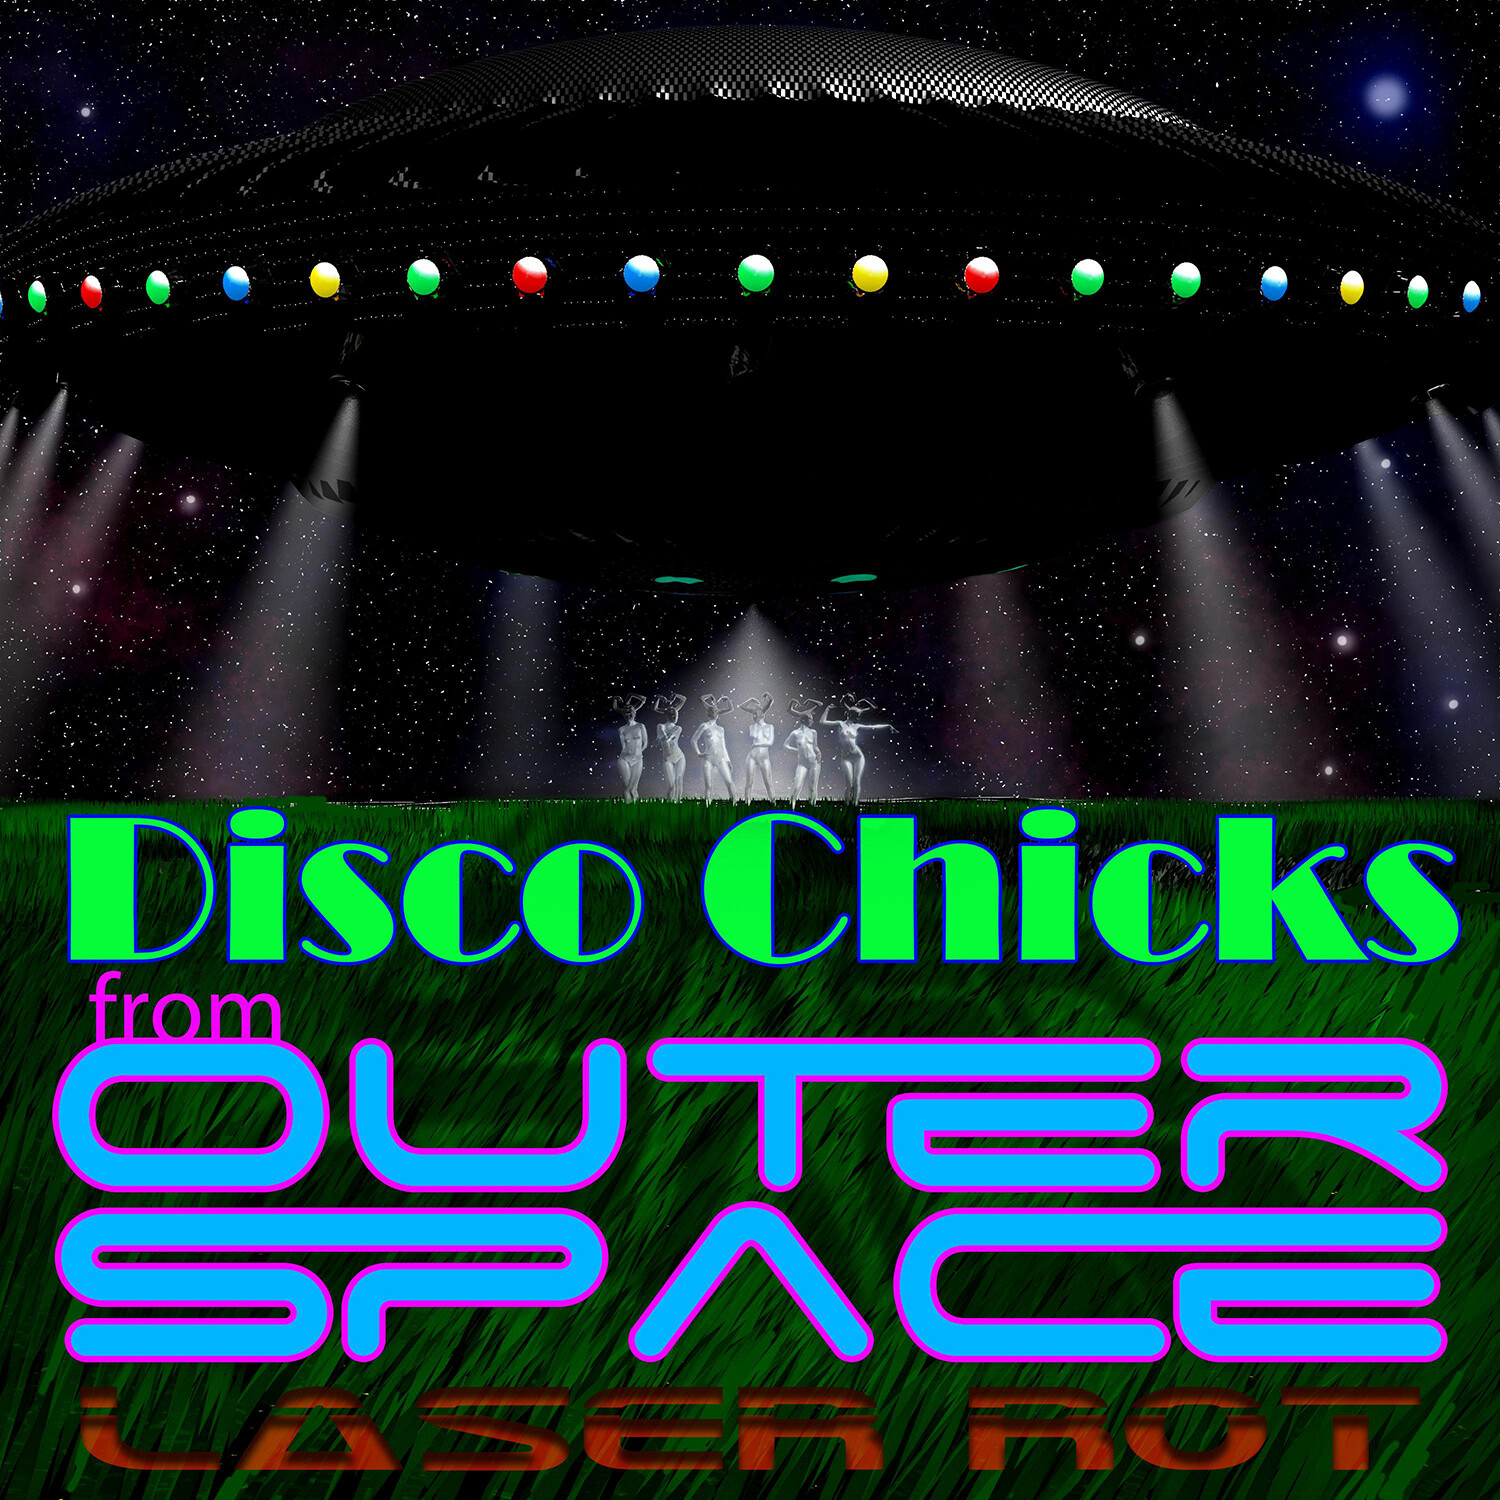 Disco Chicks From Outer Space (Album Cover Artwork)